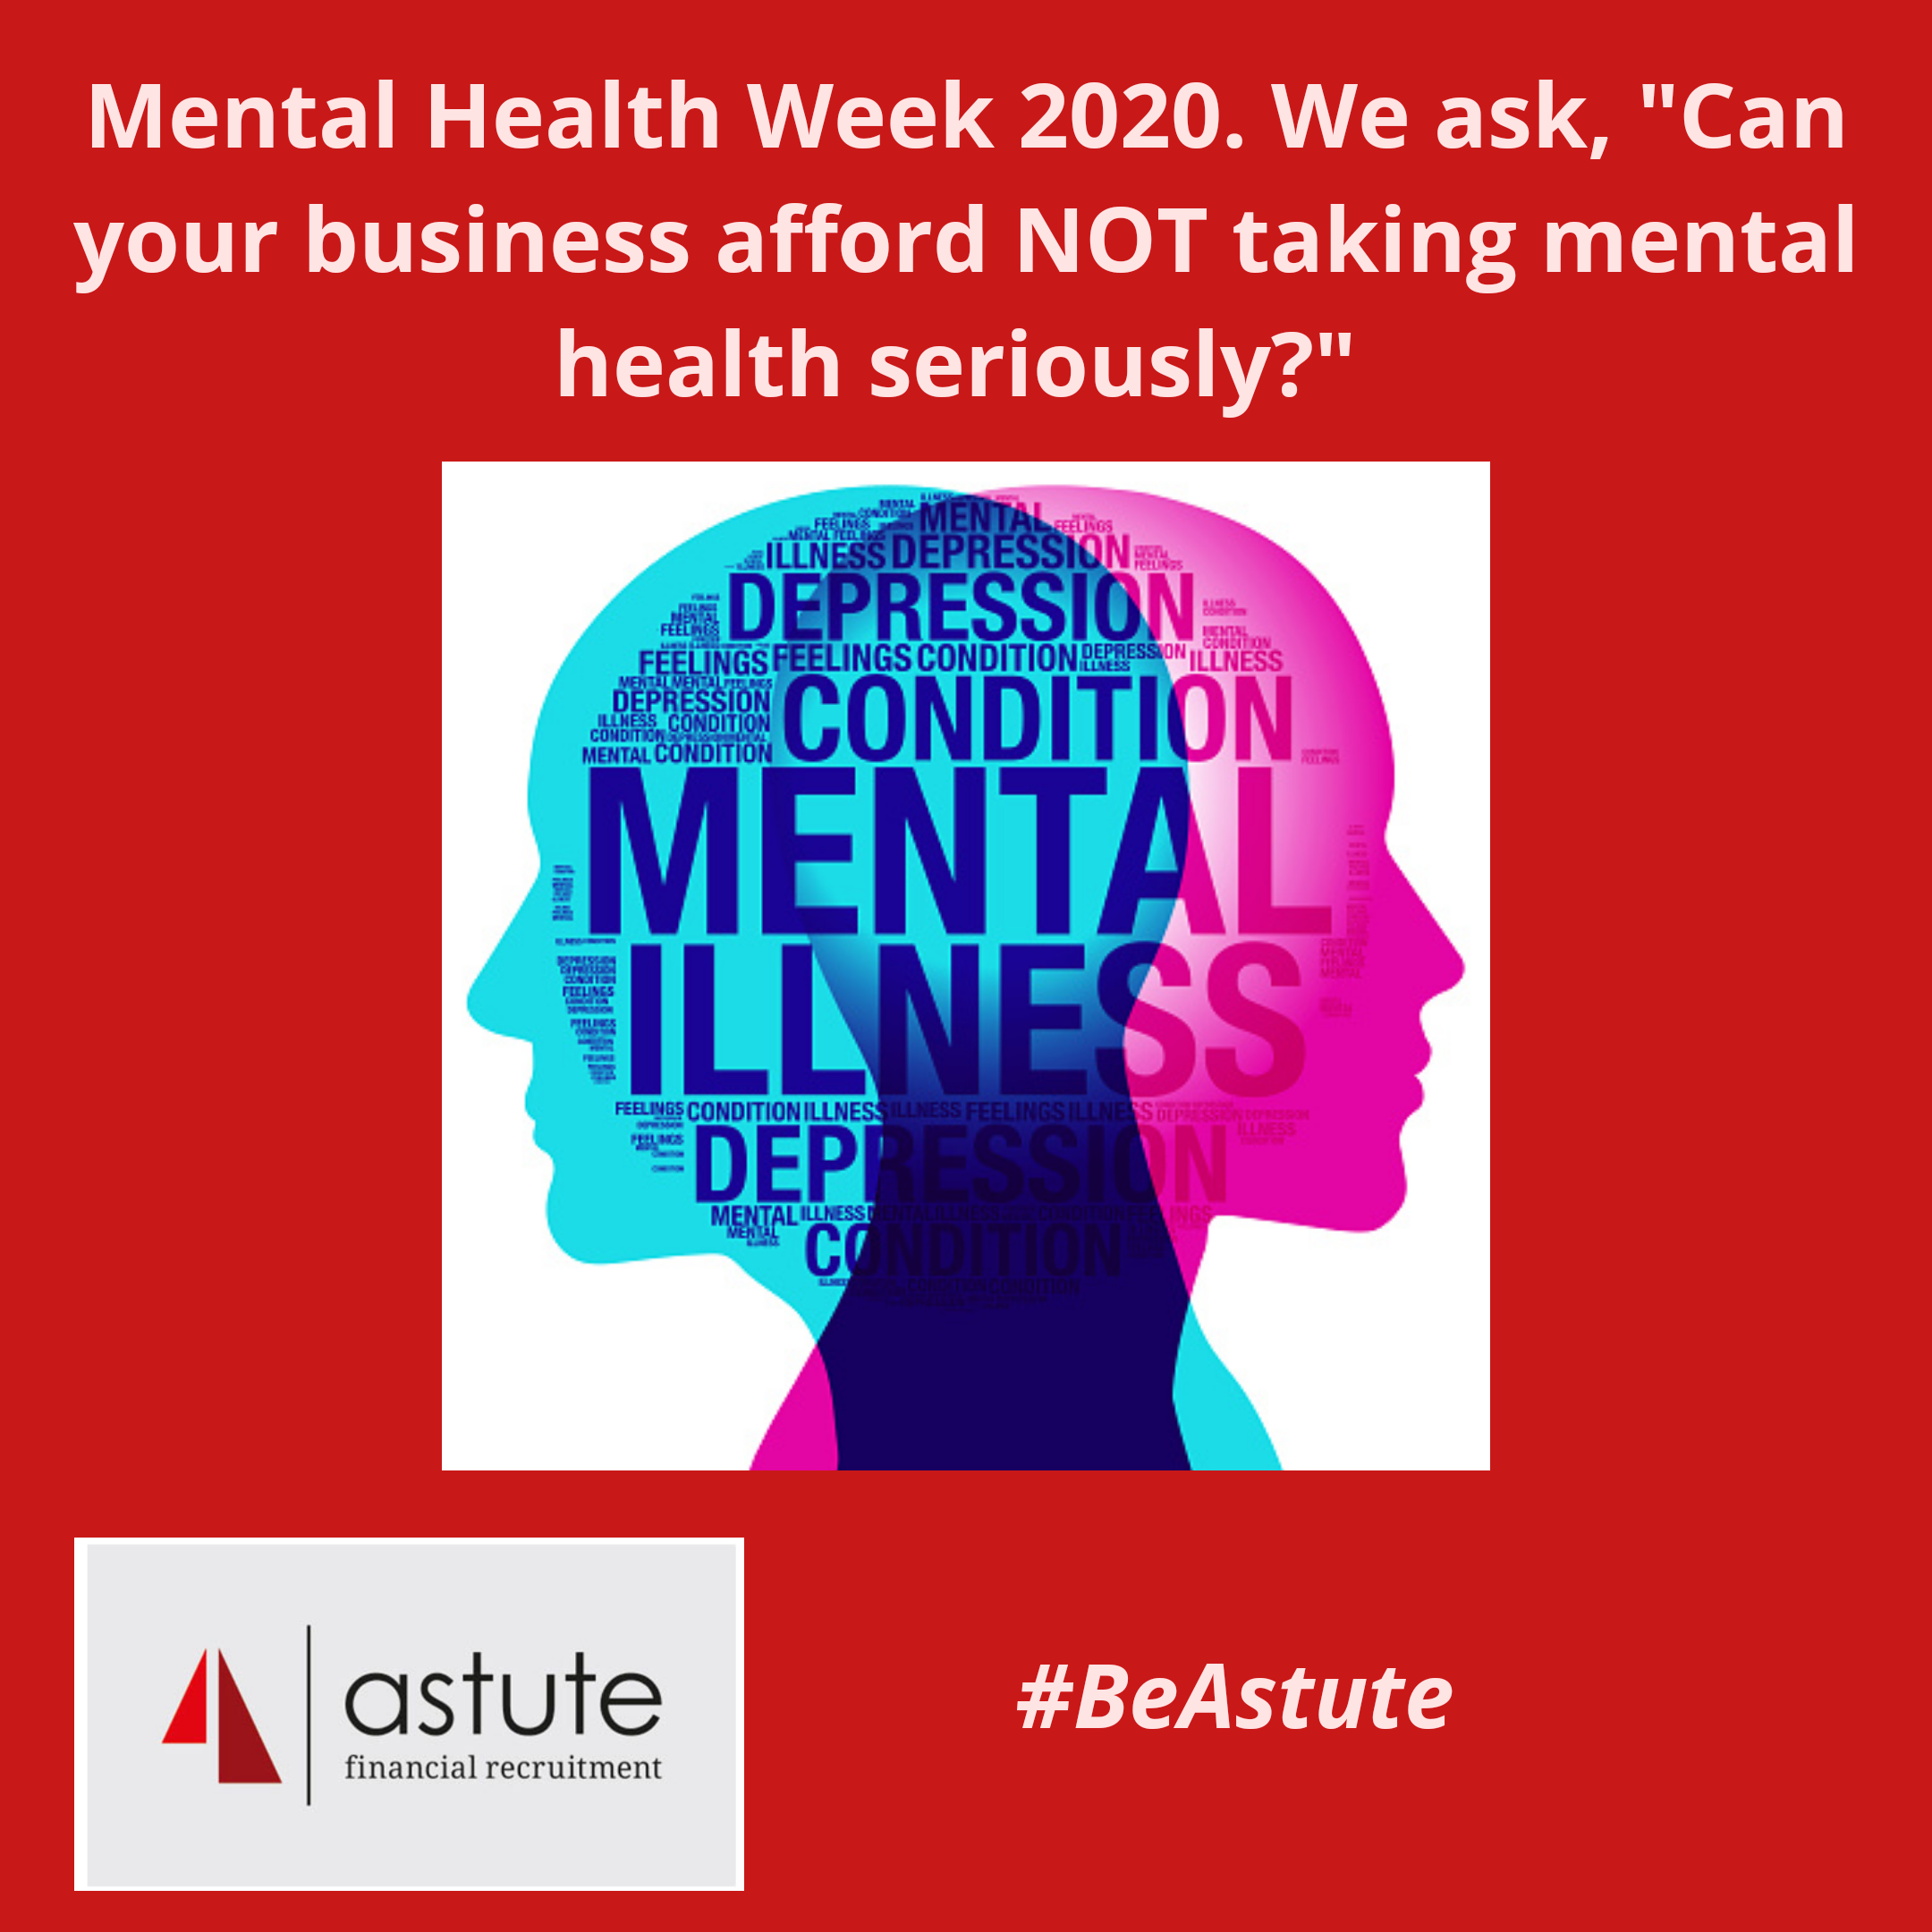 Mental Health Week 2020. We ask can your business afford NOT to take mental health seriously?